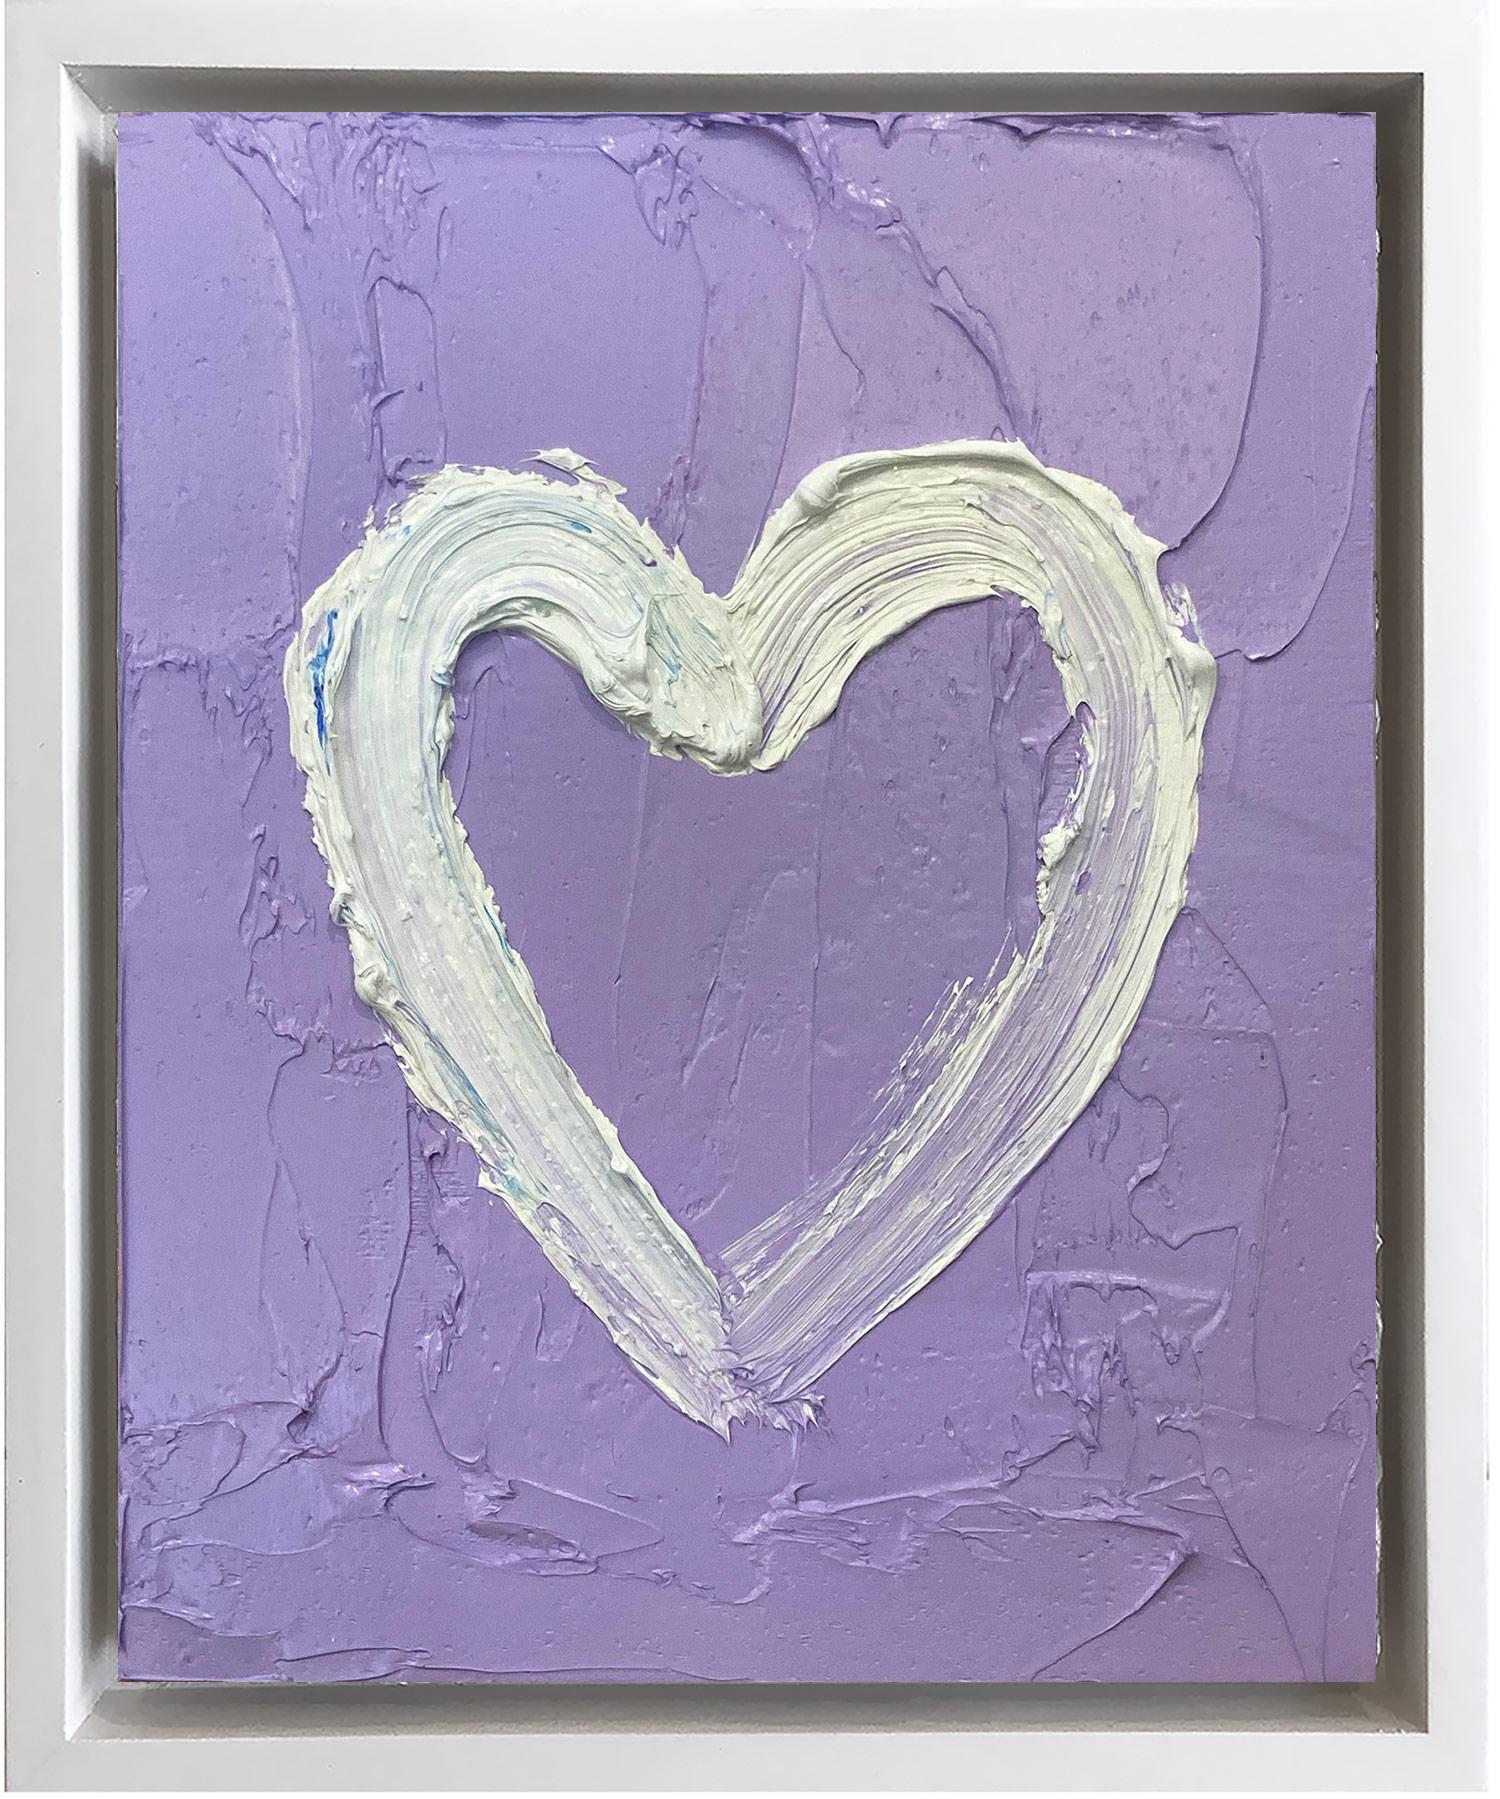 "My Wisteria Heart" Lavender Pop Oil Painting Wood With White Floater Frame